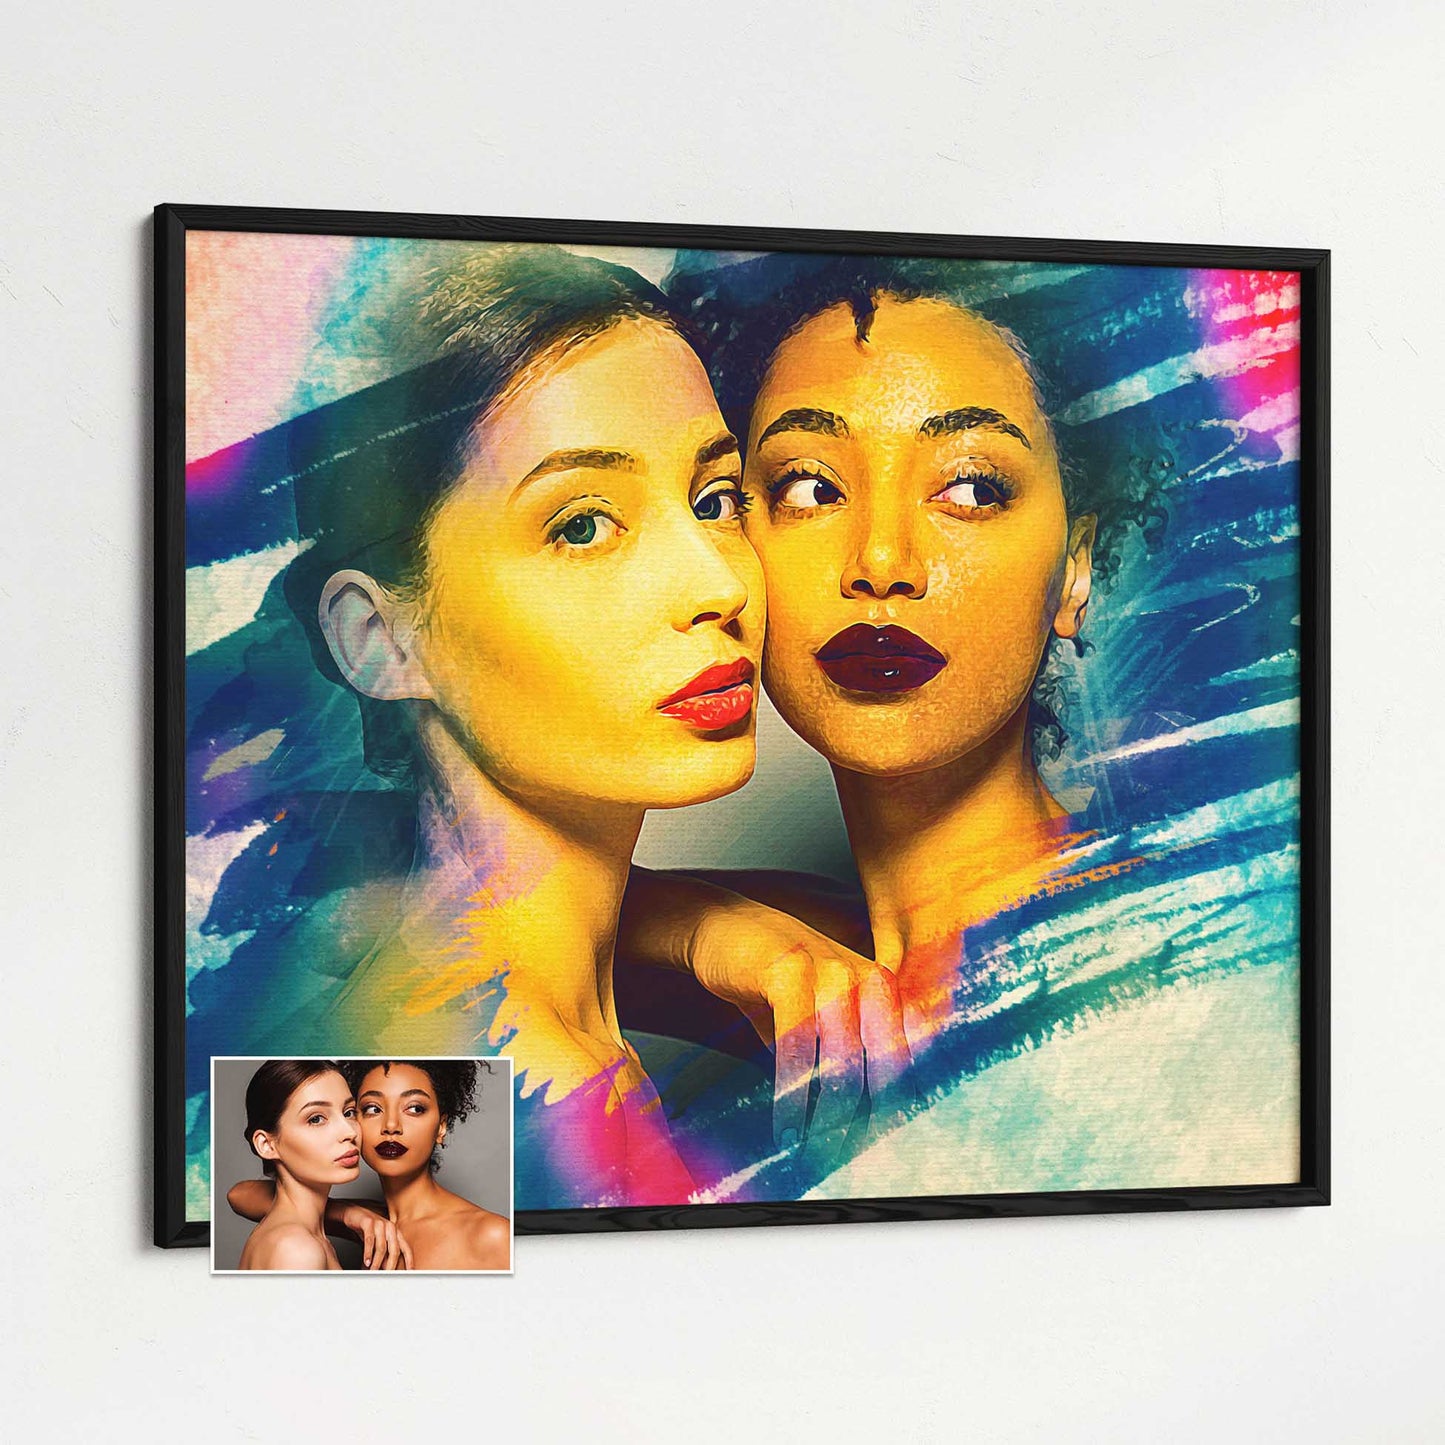 Unleash your creativity with our Personalised Artistic Brush Painting Framed Print. Each piece is a work of art, meticulously crafted from a photo, and transformed into a stunning watercolor-style masterpiece, imaginative brush strokes 